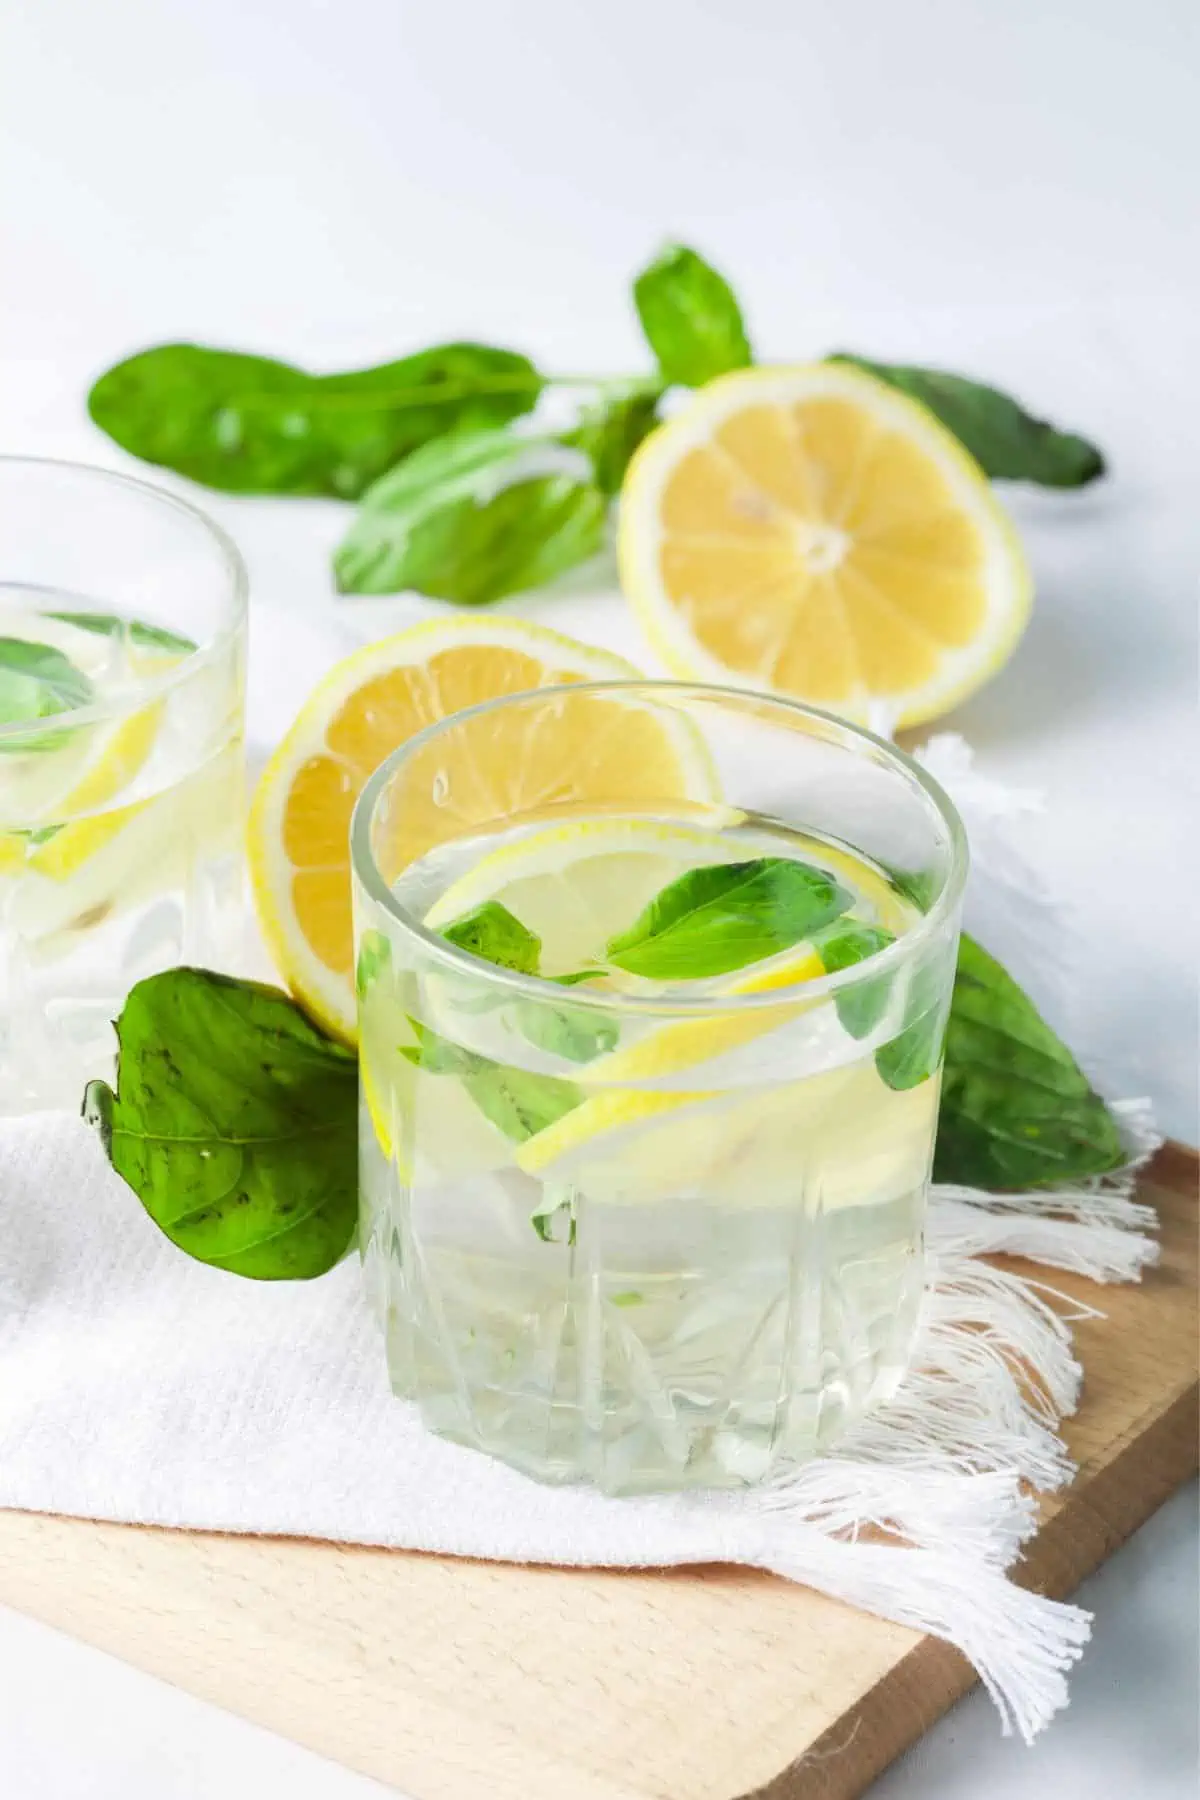 A glass of basil lemon-infused water.